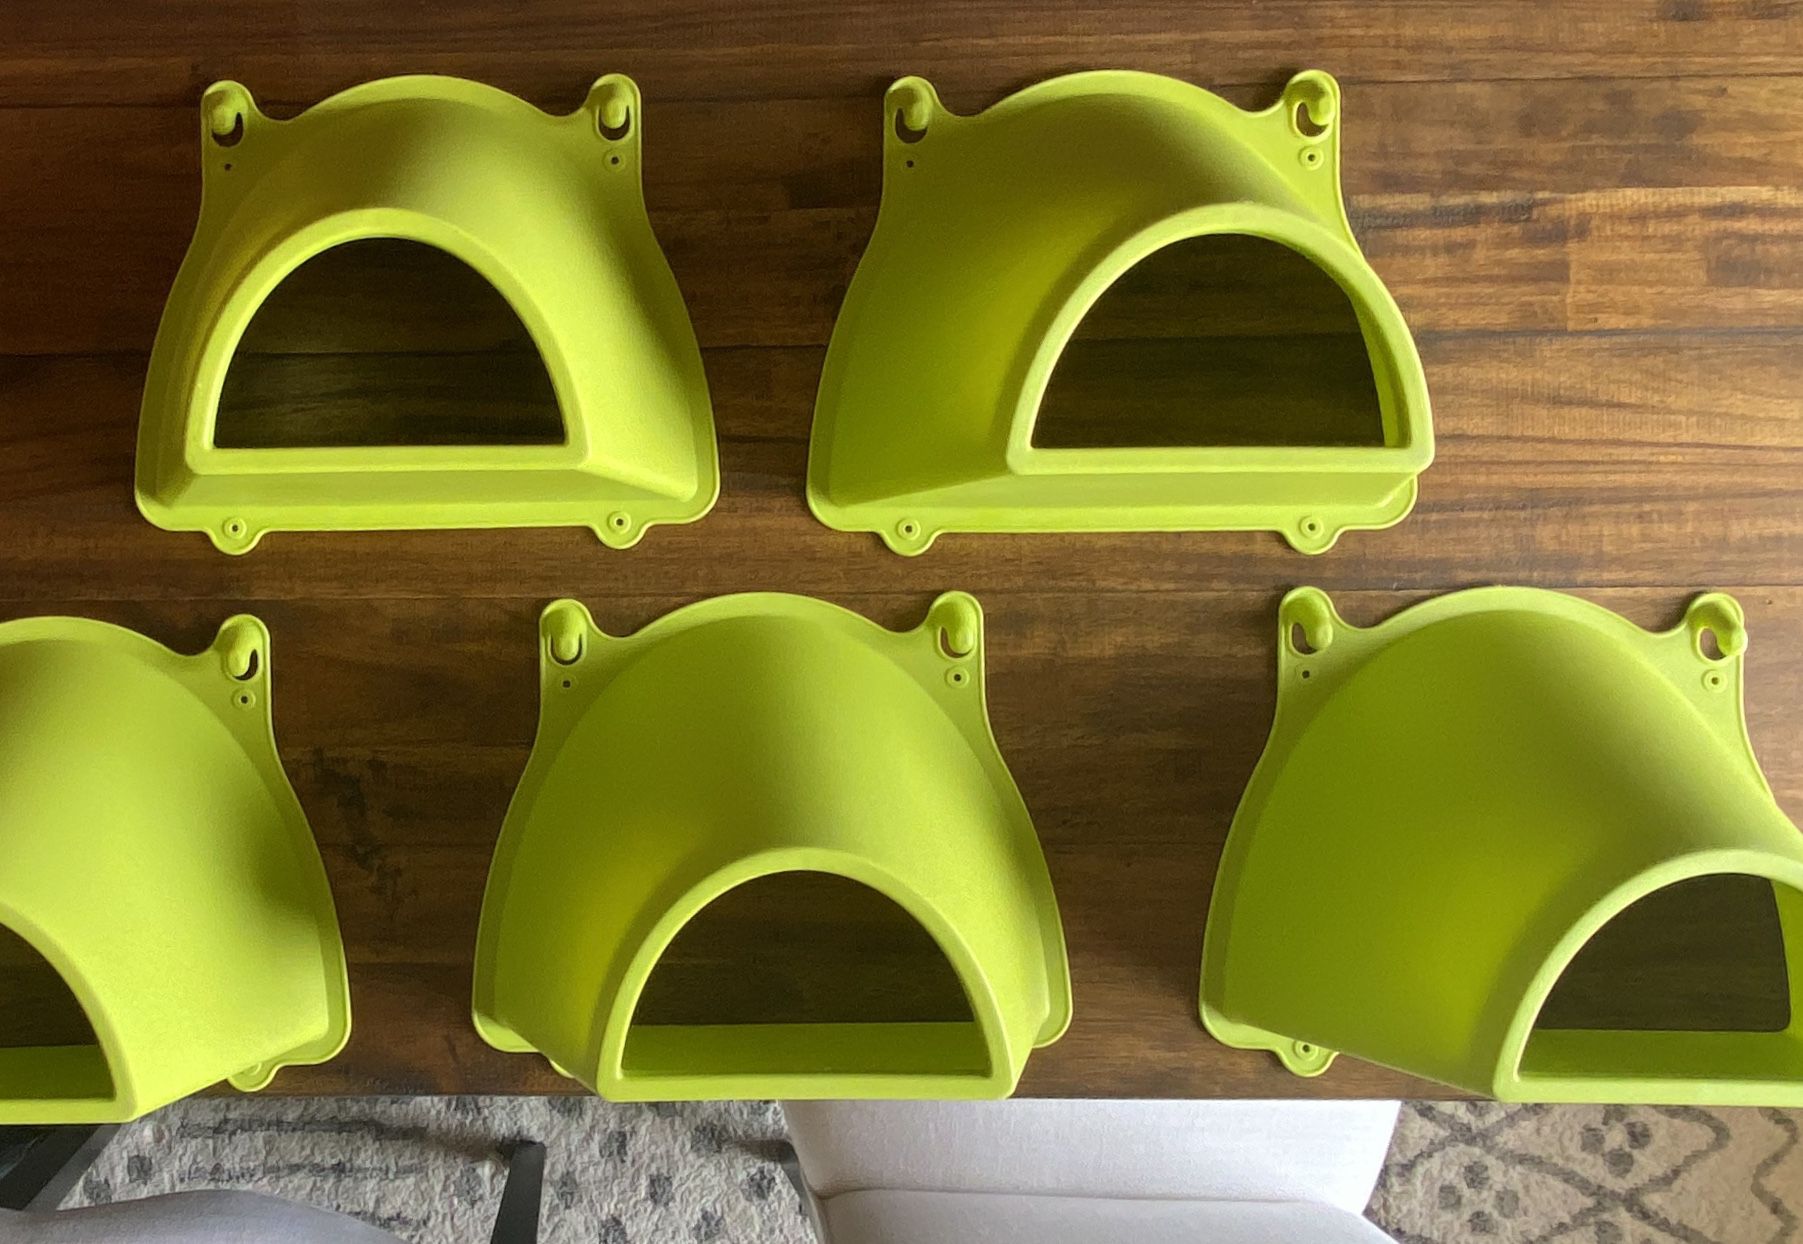 IKEA Krogig wall storage containers